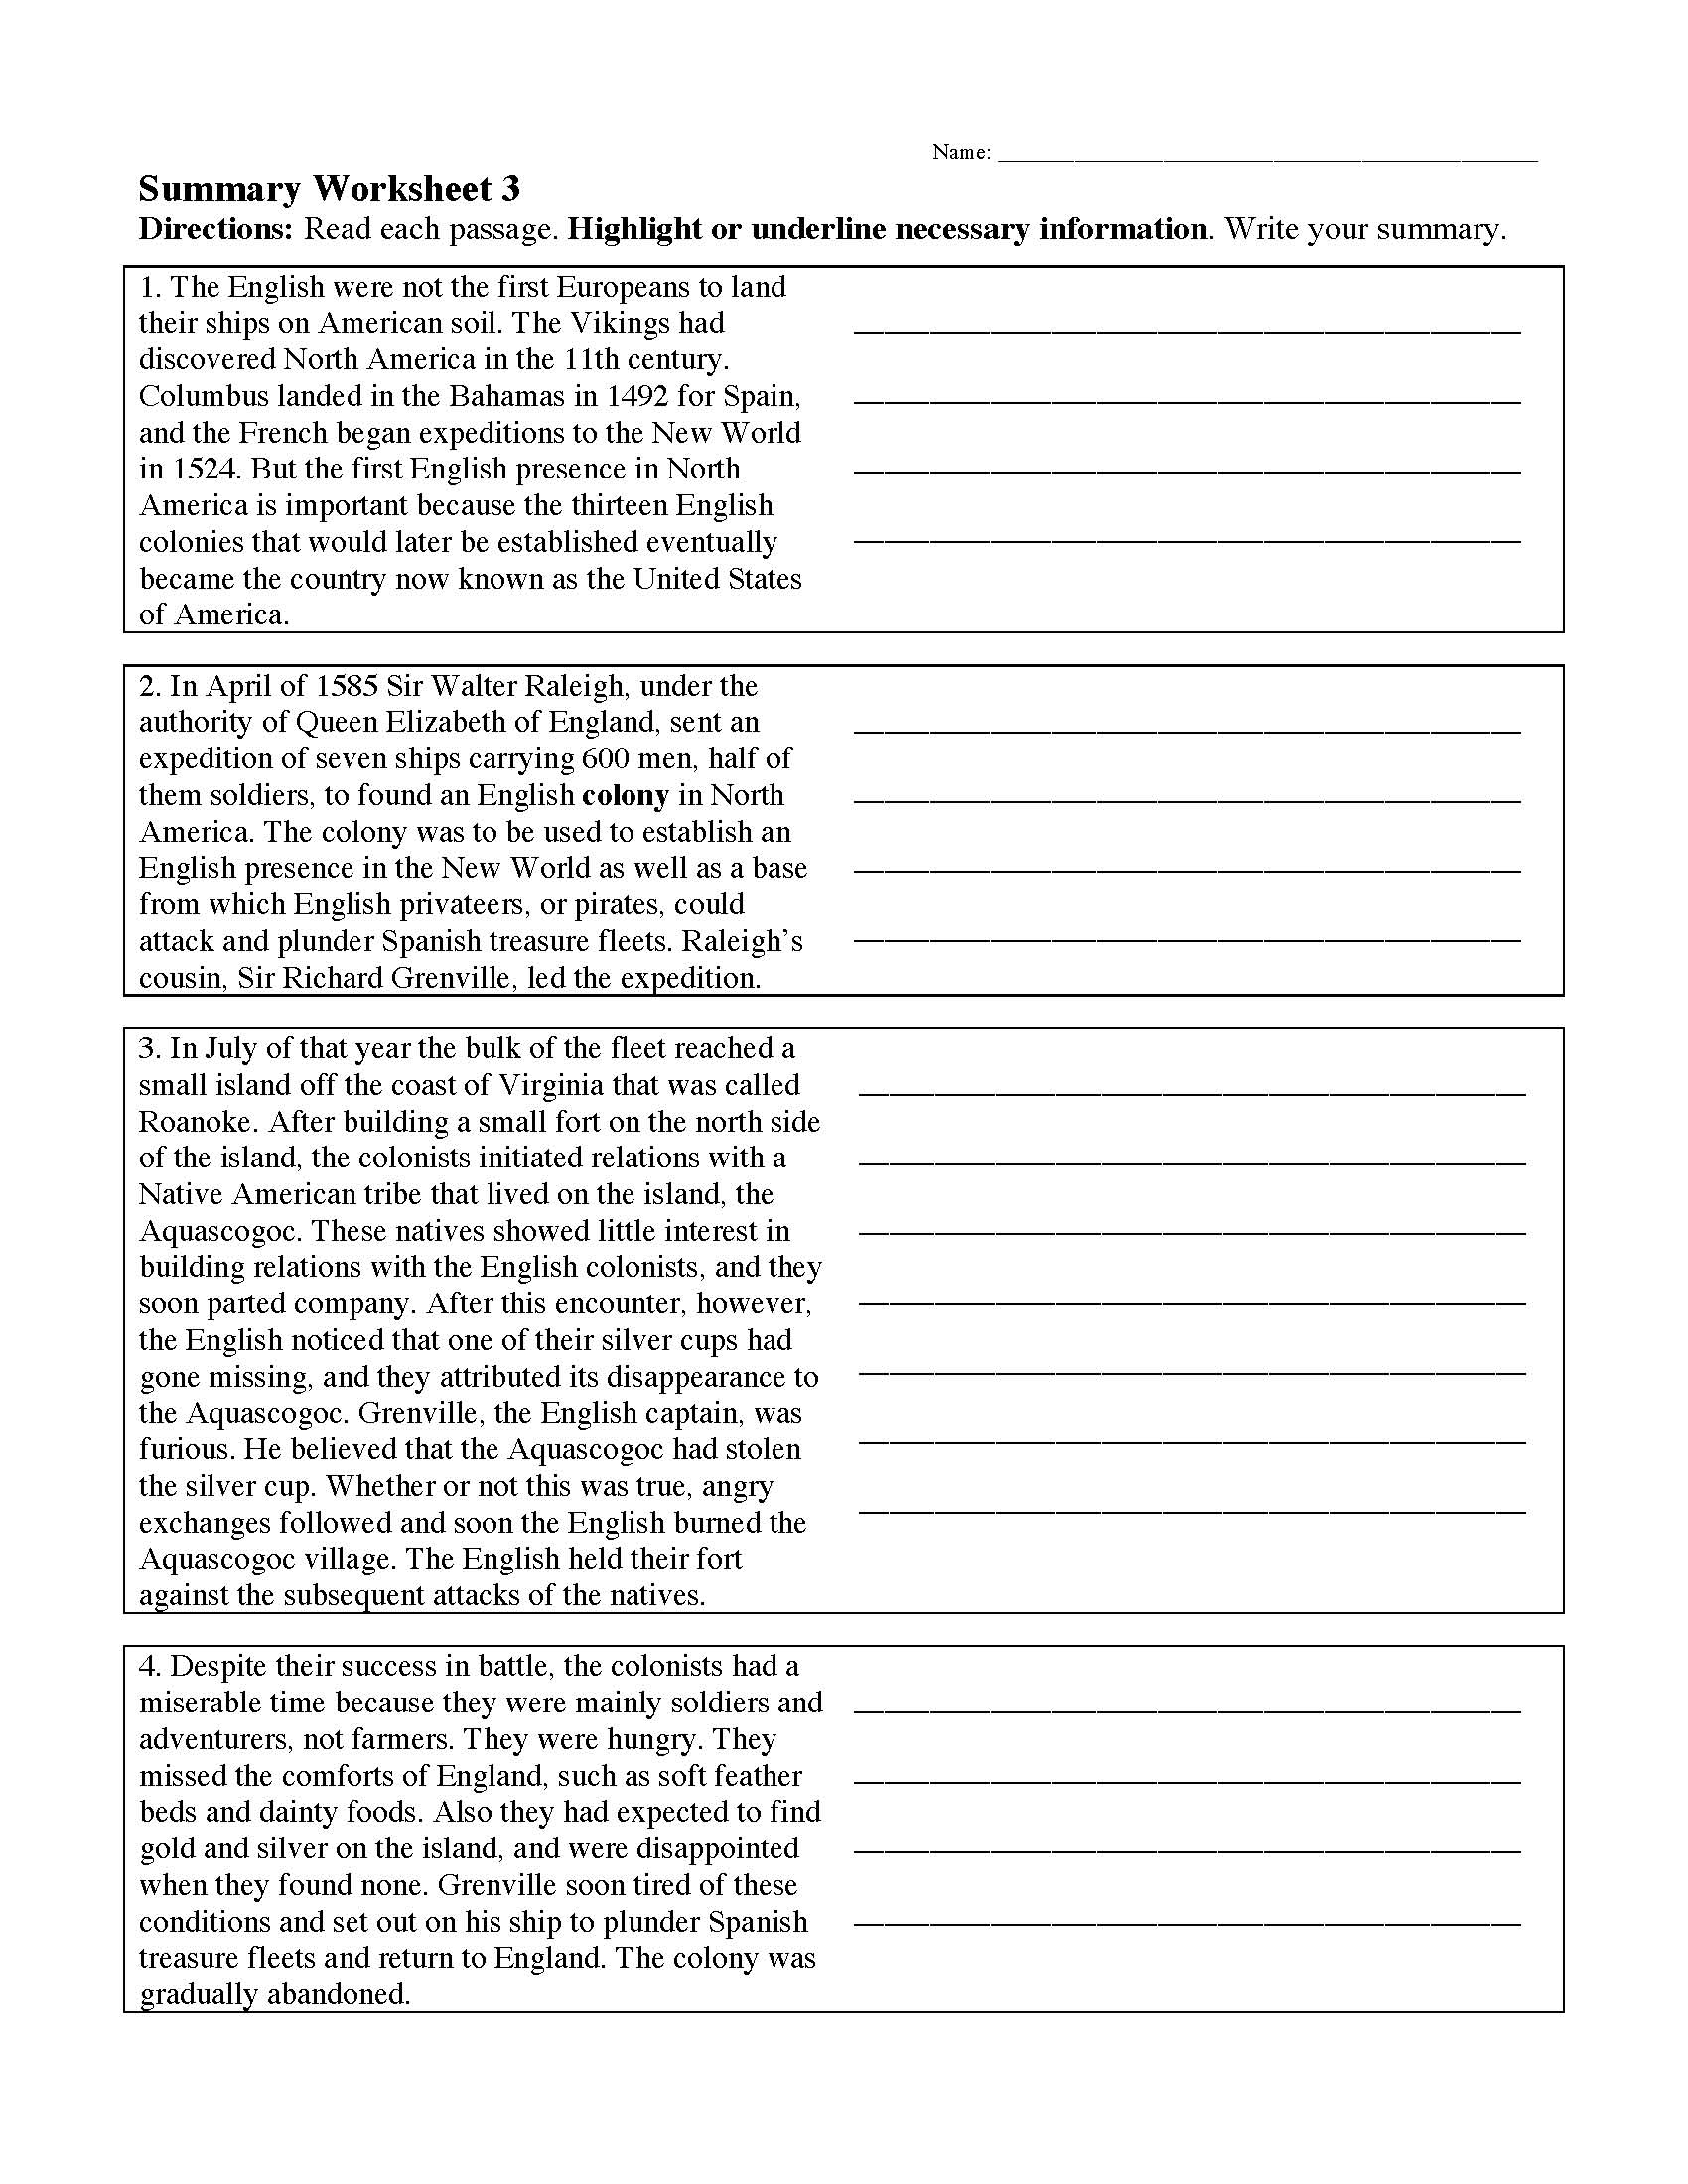 This is a preview image of Summarizing Worksheet 3. Click on it to enlarge it or view the source file.